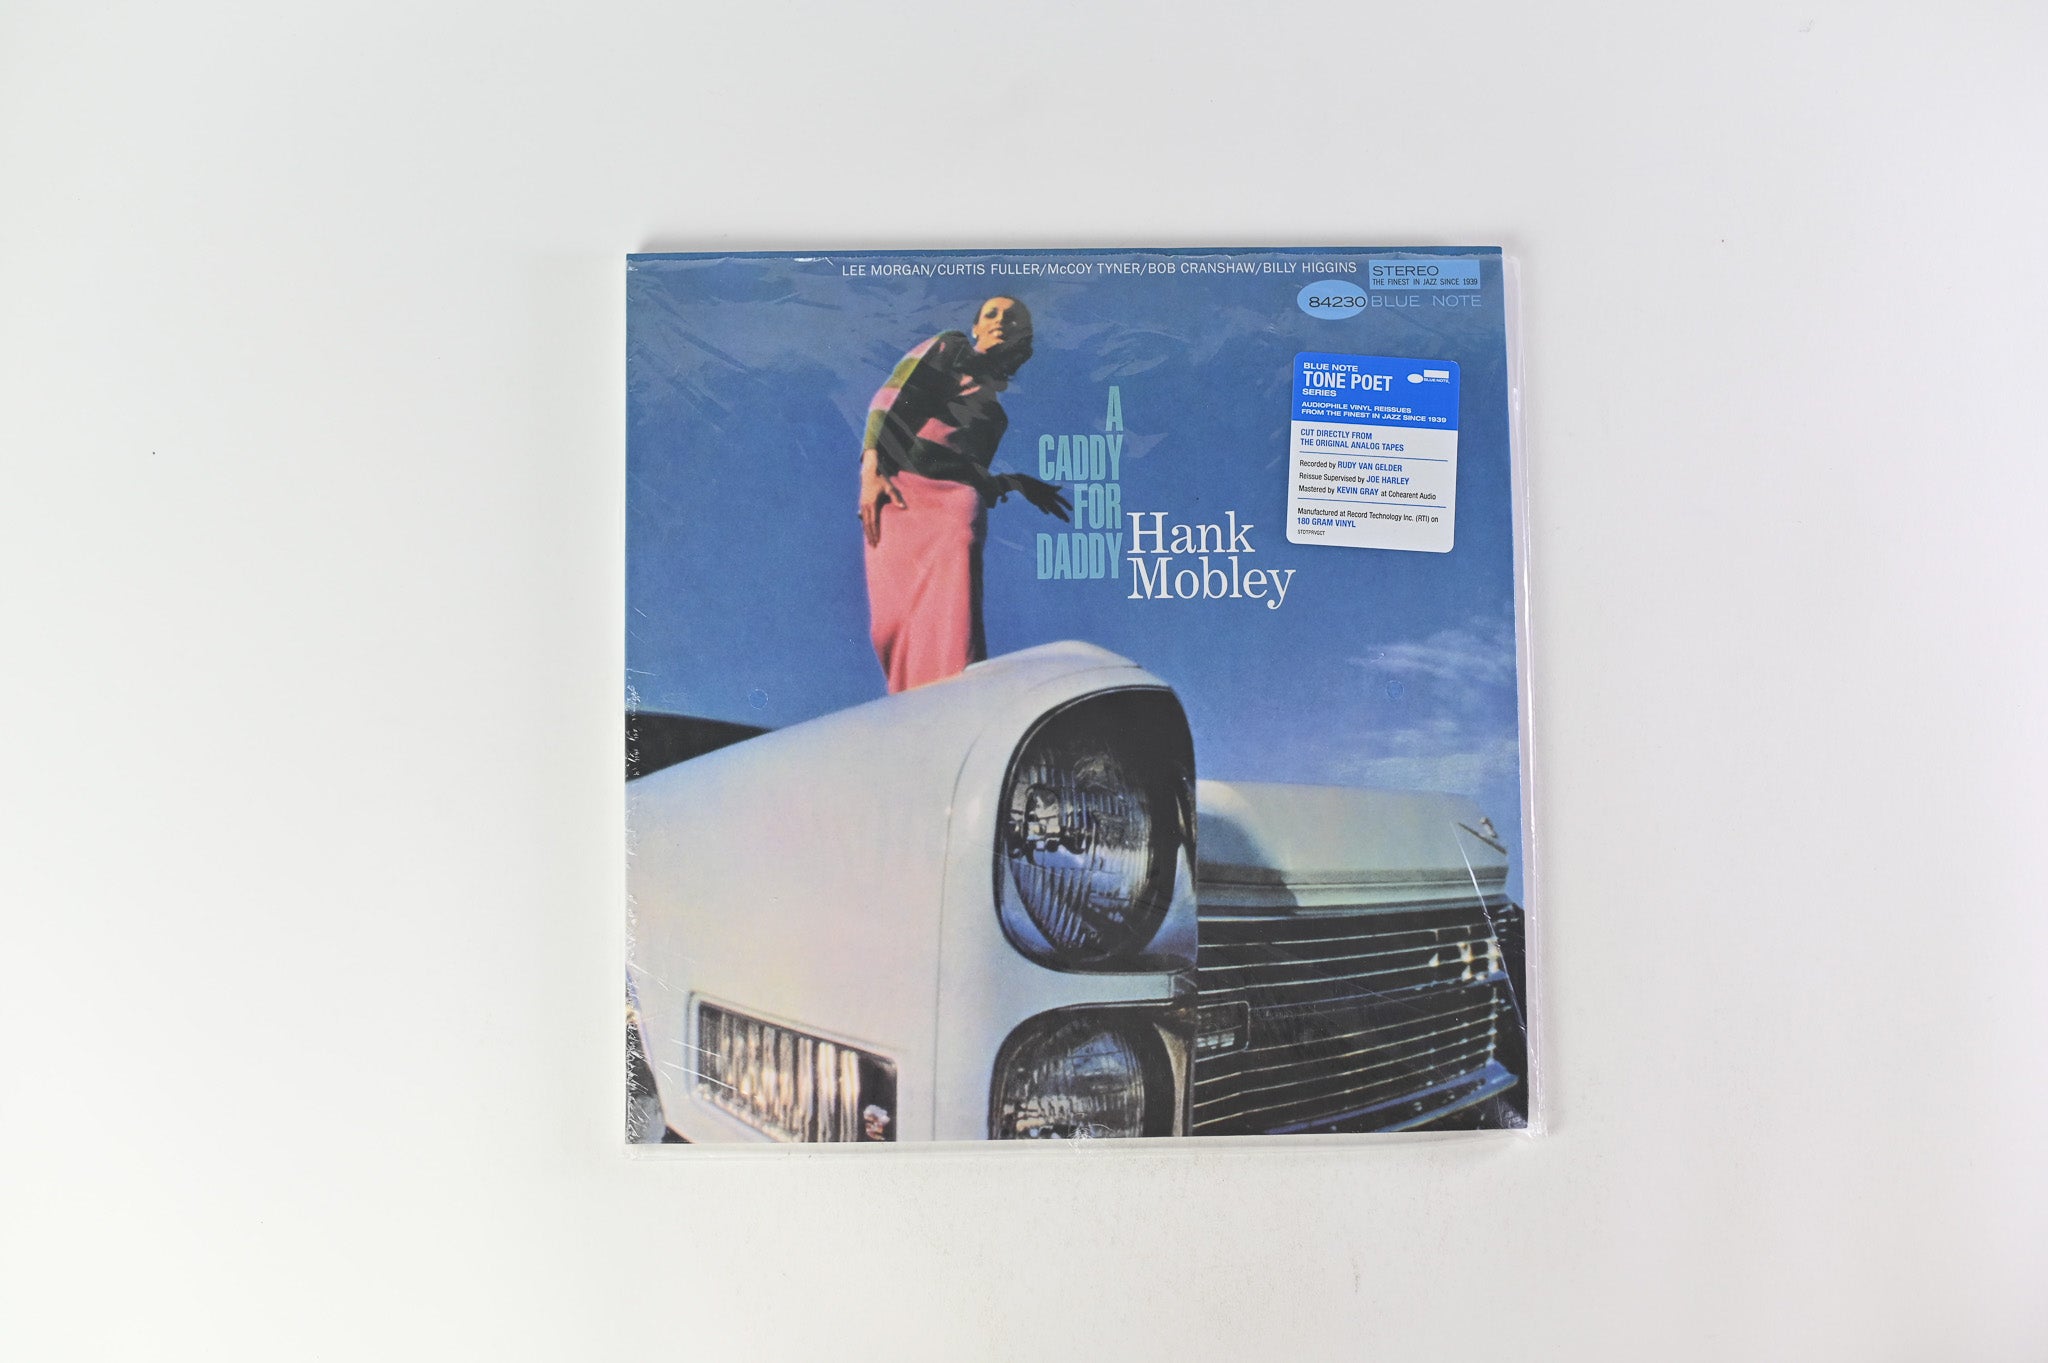 Hank Mobley - A Caddy For Daddy on Blue Note Tonet Poet Series